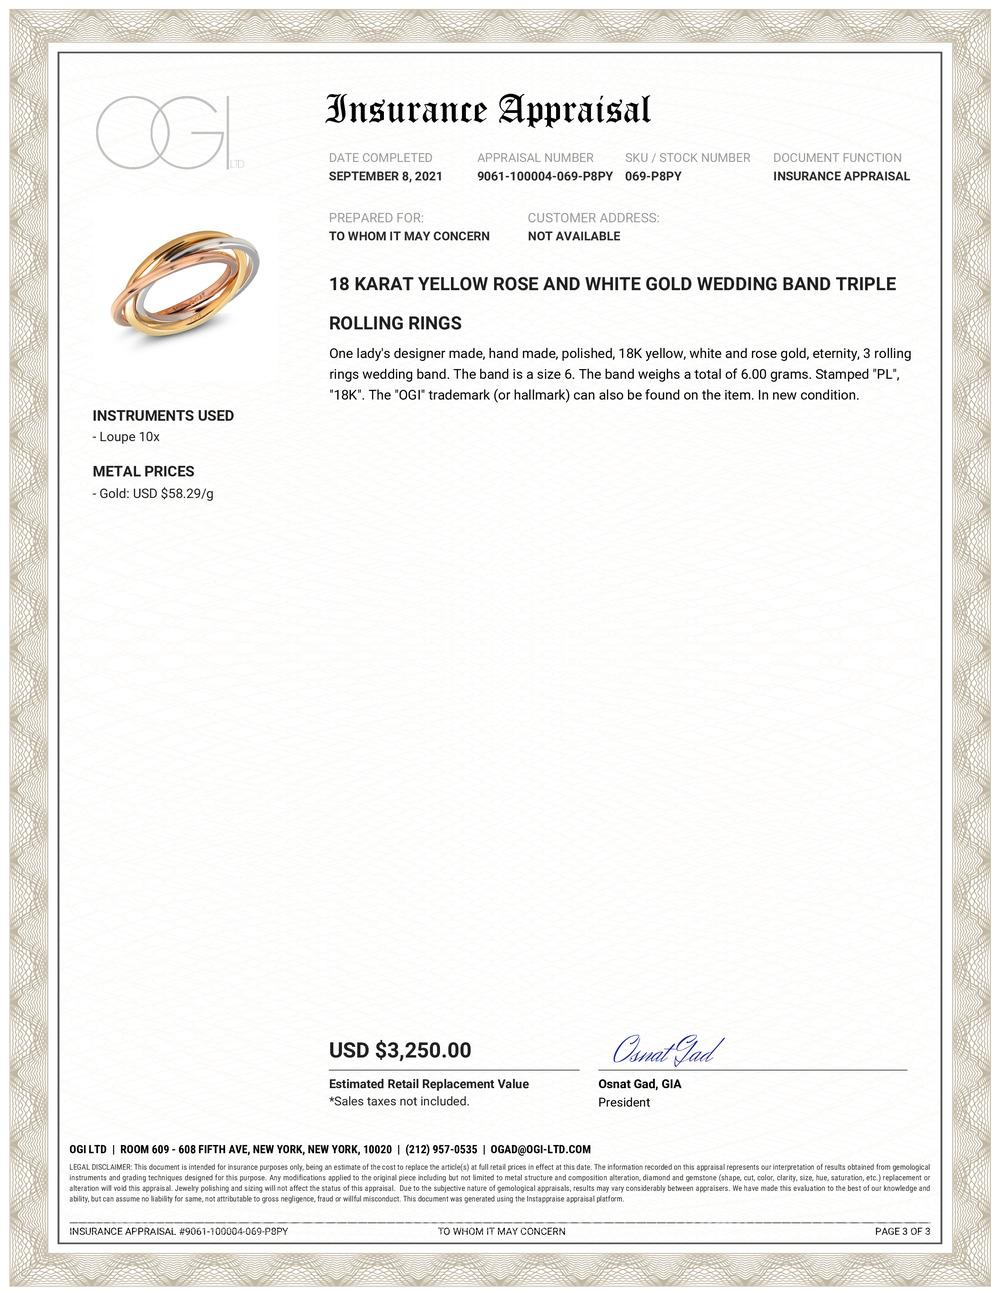 Eighteen Karat White, Yellow and Rose gold rolling ring
Each band measures 1.5 millimeter
Ring size 6
Comfort fit
Ring cannot be resized 
Handmade in the USA
Three bands made in die striking process that utilizes an enormous amount of pressure to